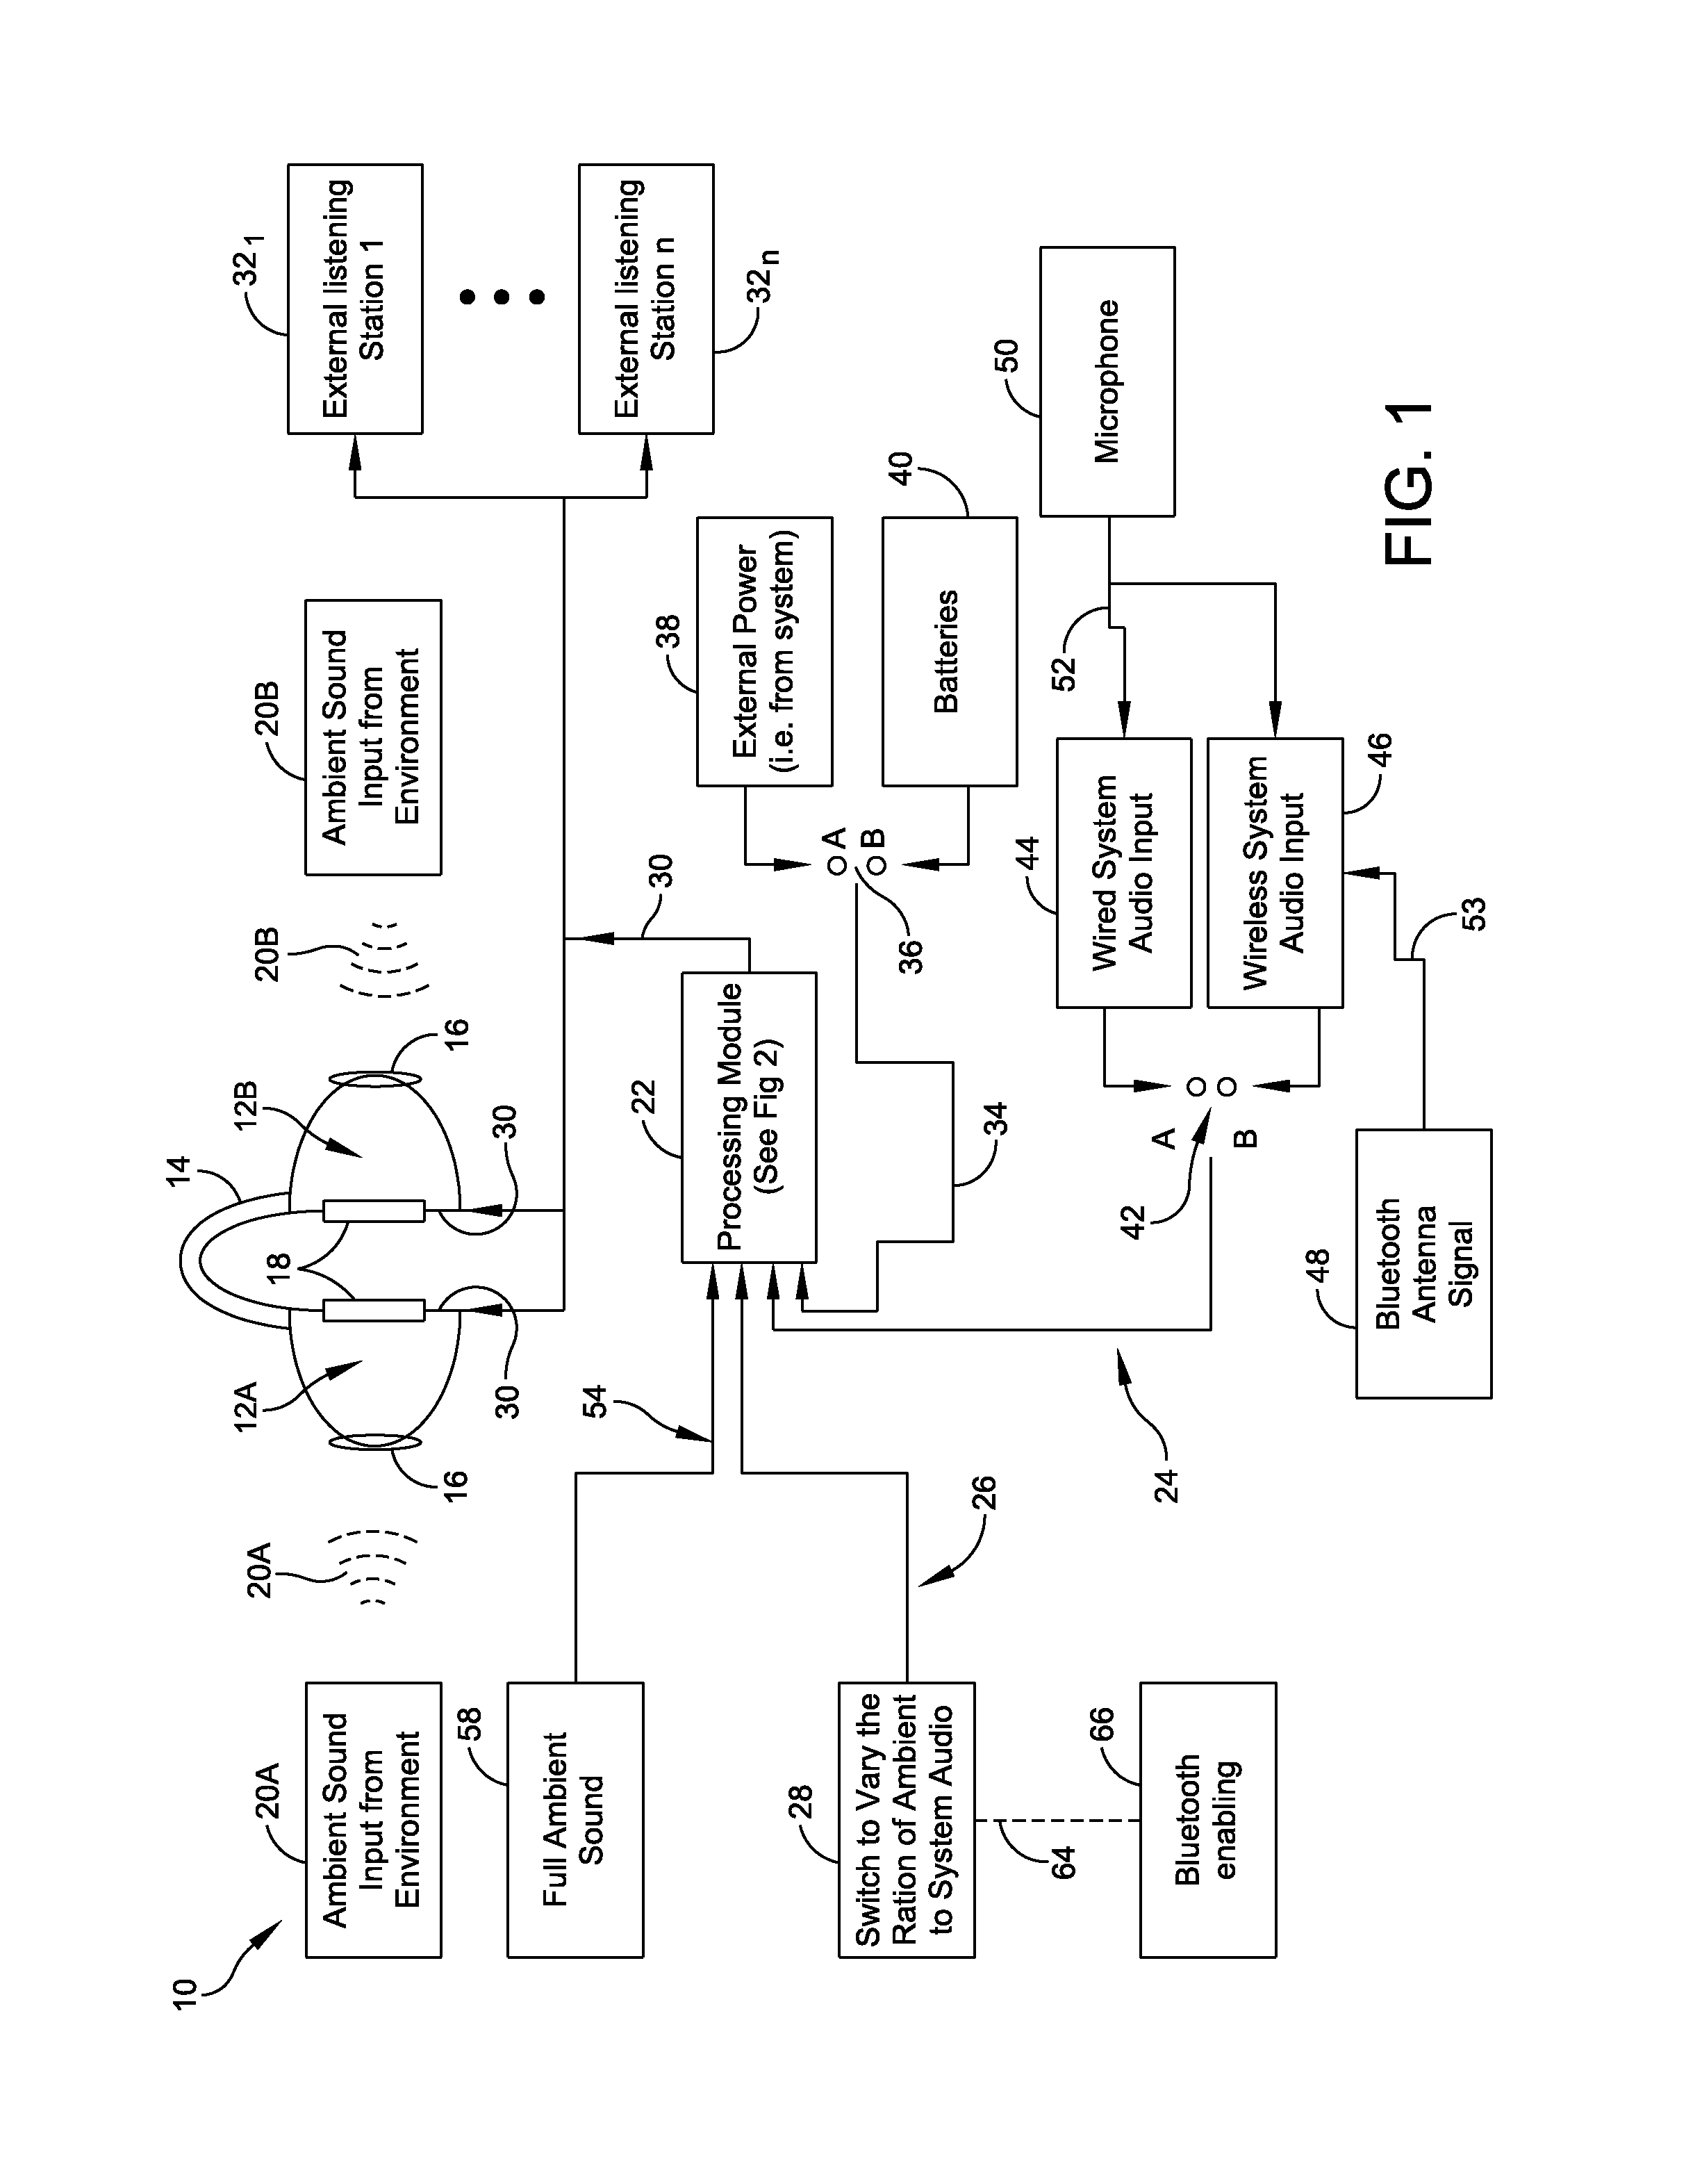 Sound identification and discernment device